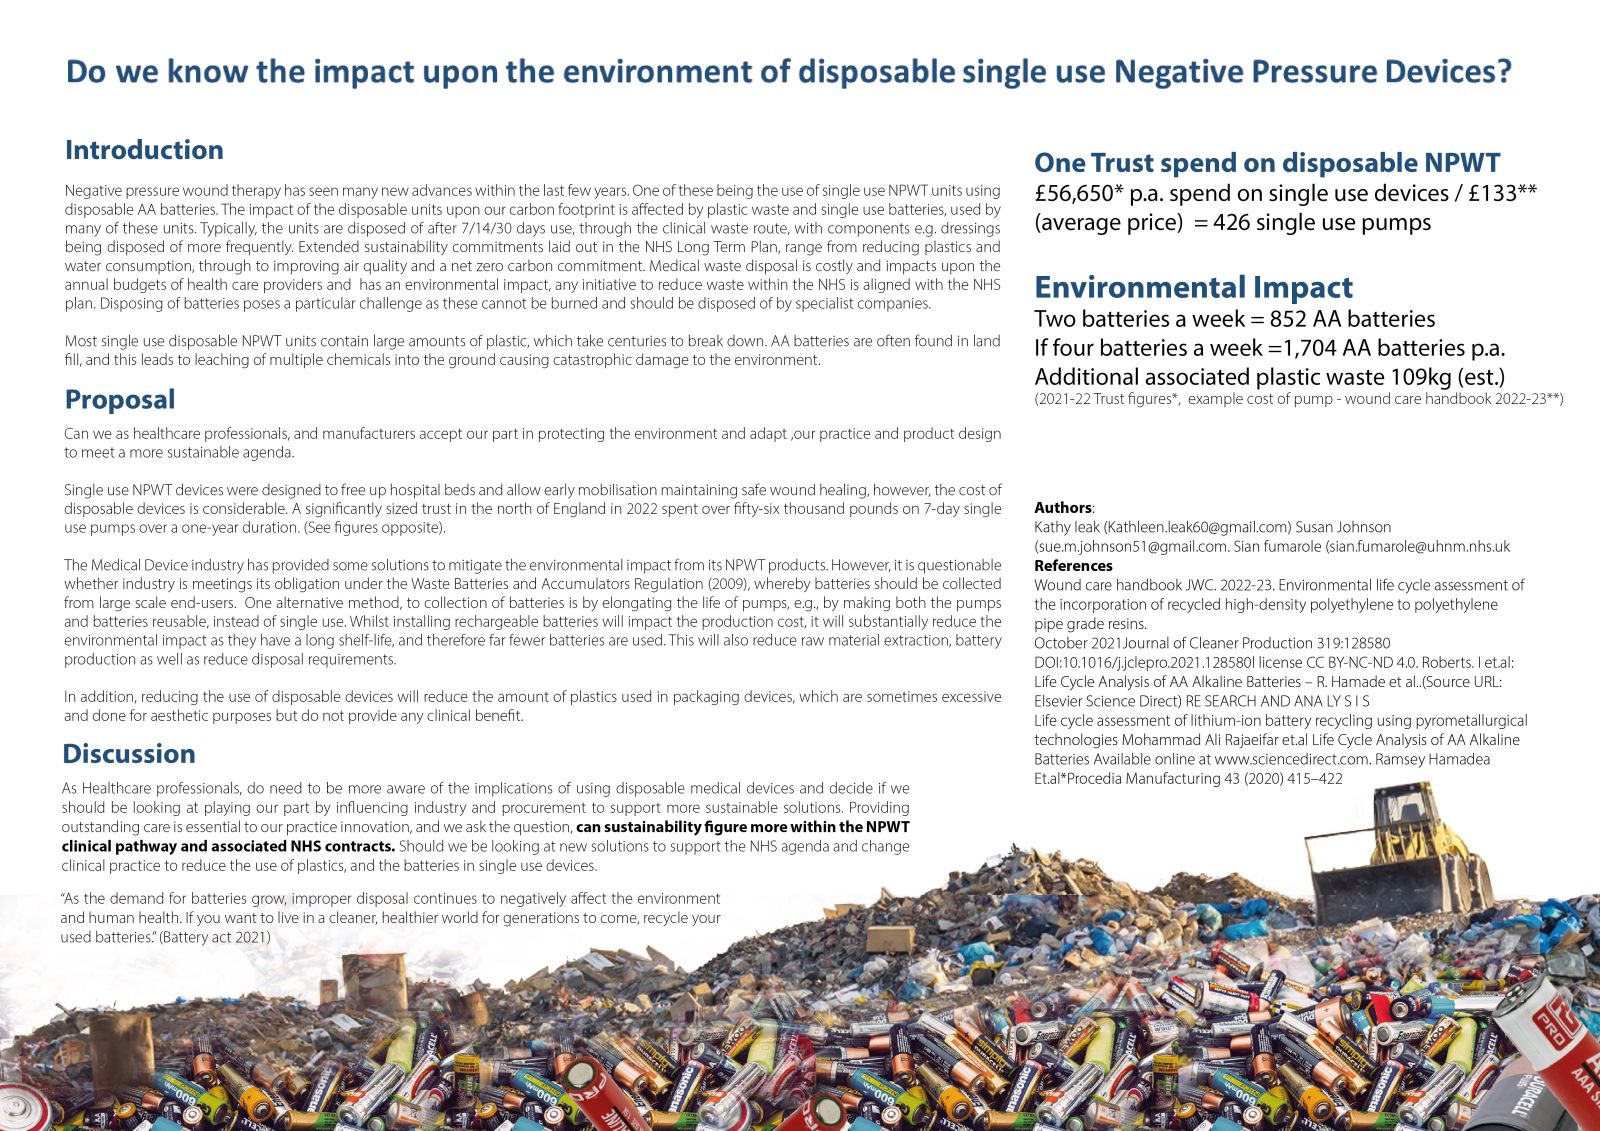 Do we know the impact upon the environment of disposable single use Negative Pressure Devices?